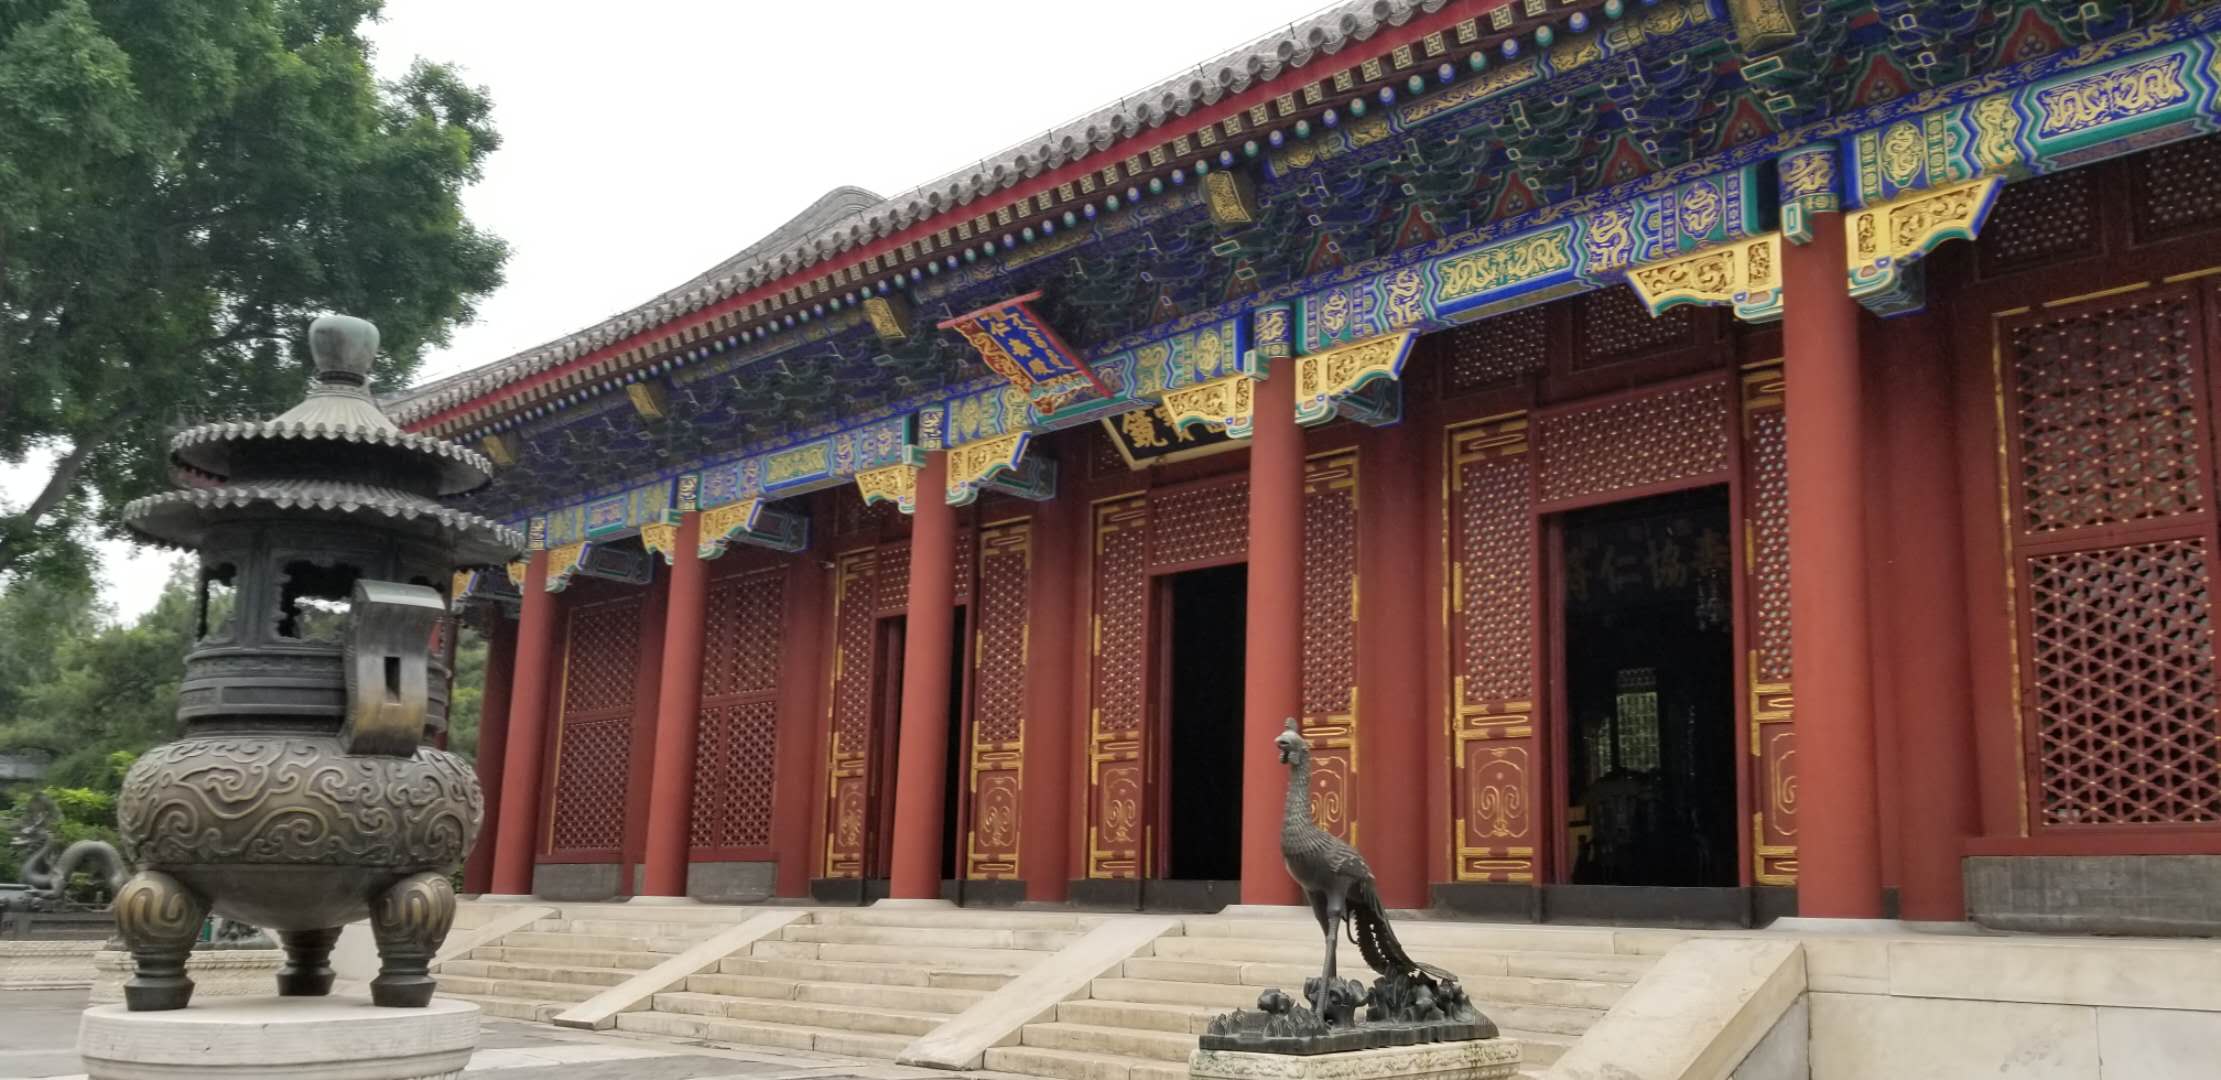 One of the buildings at the summer palace